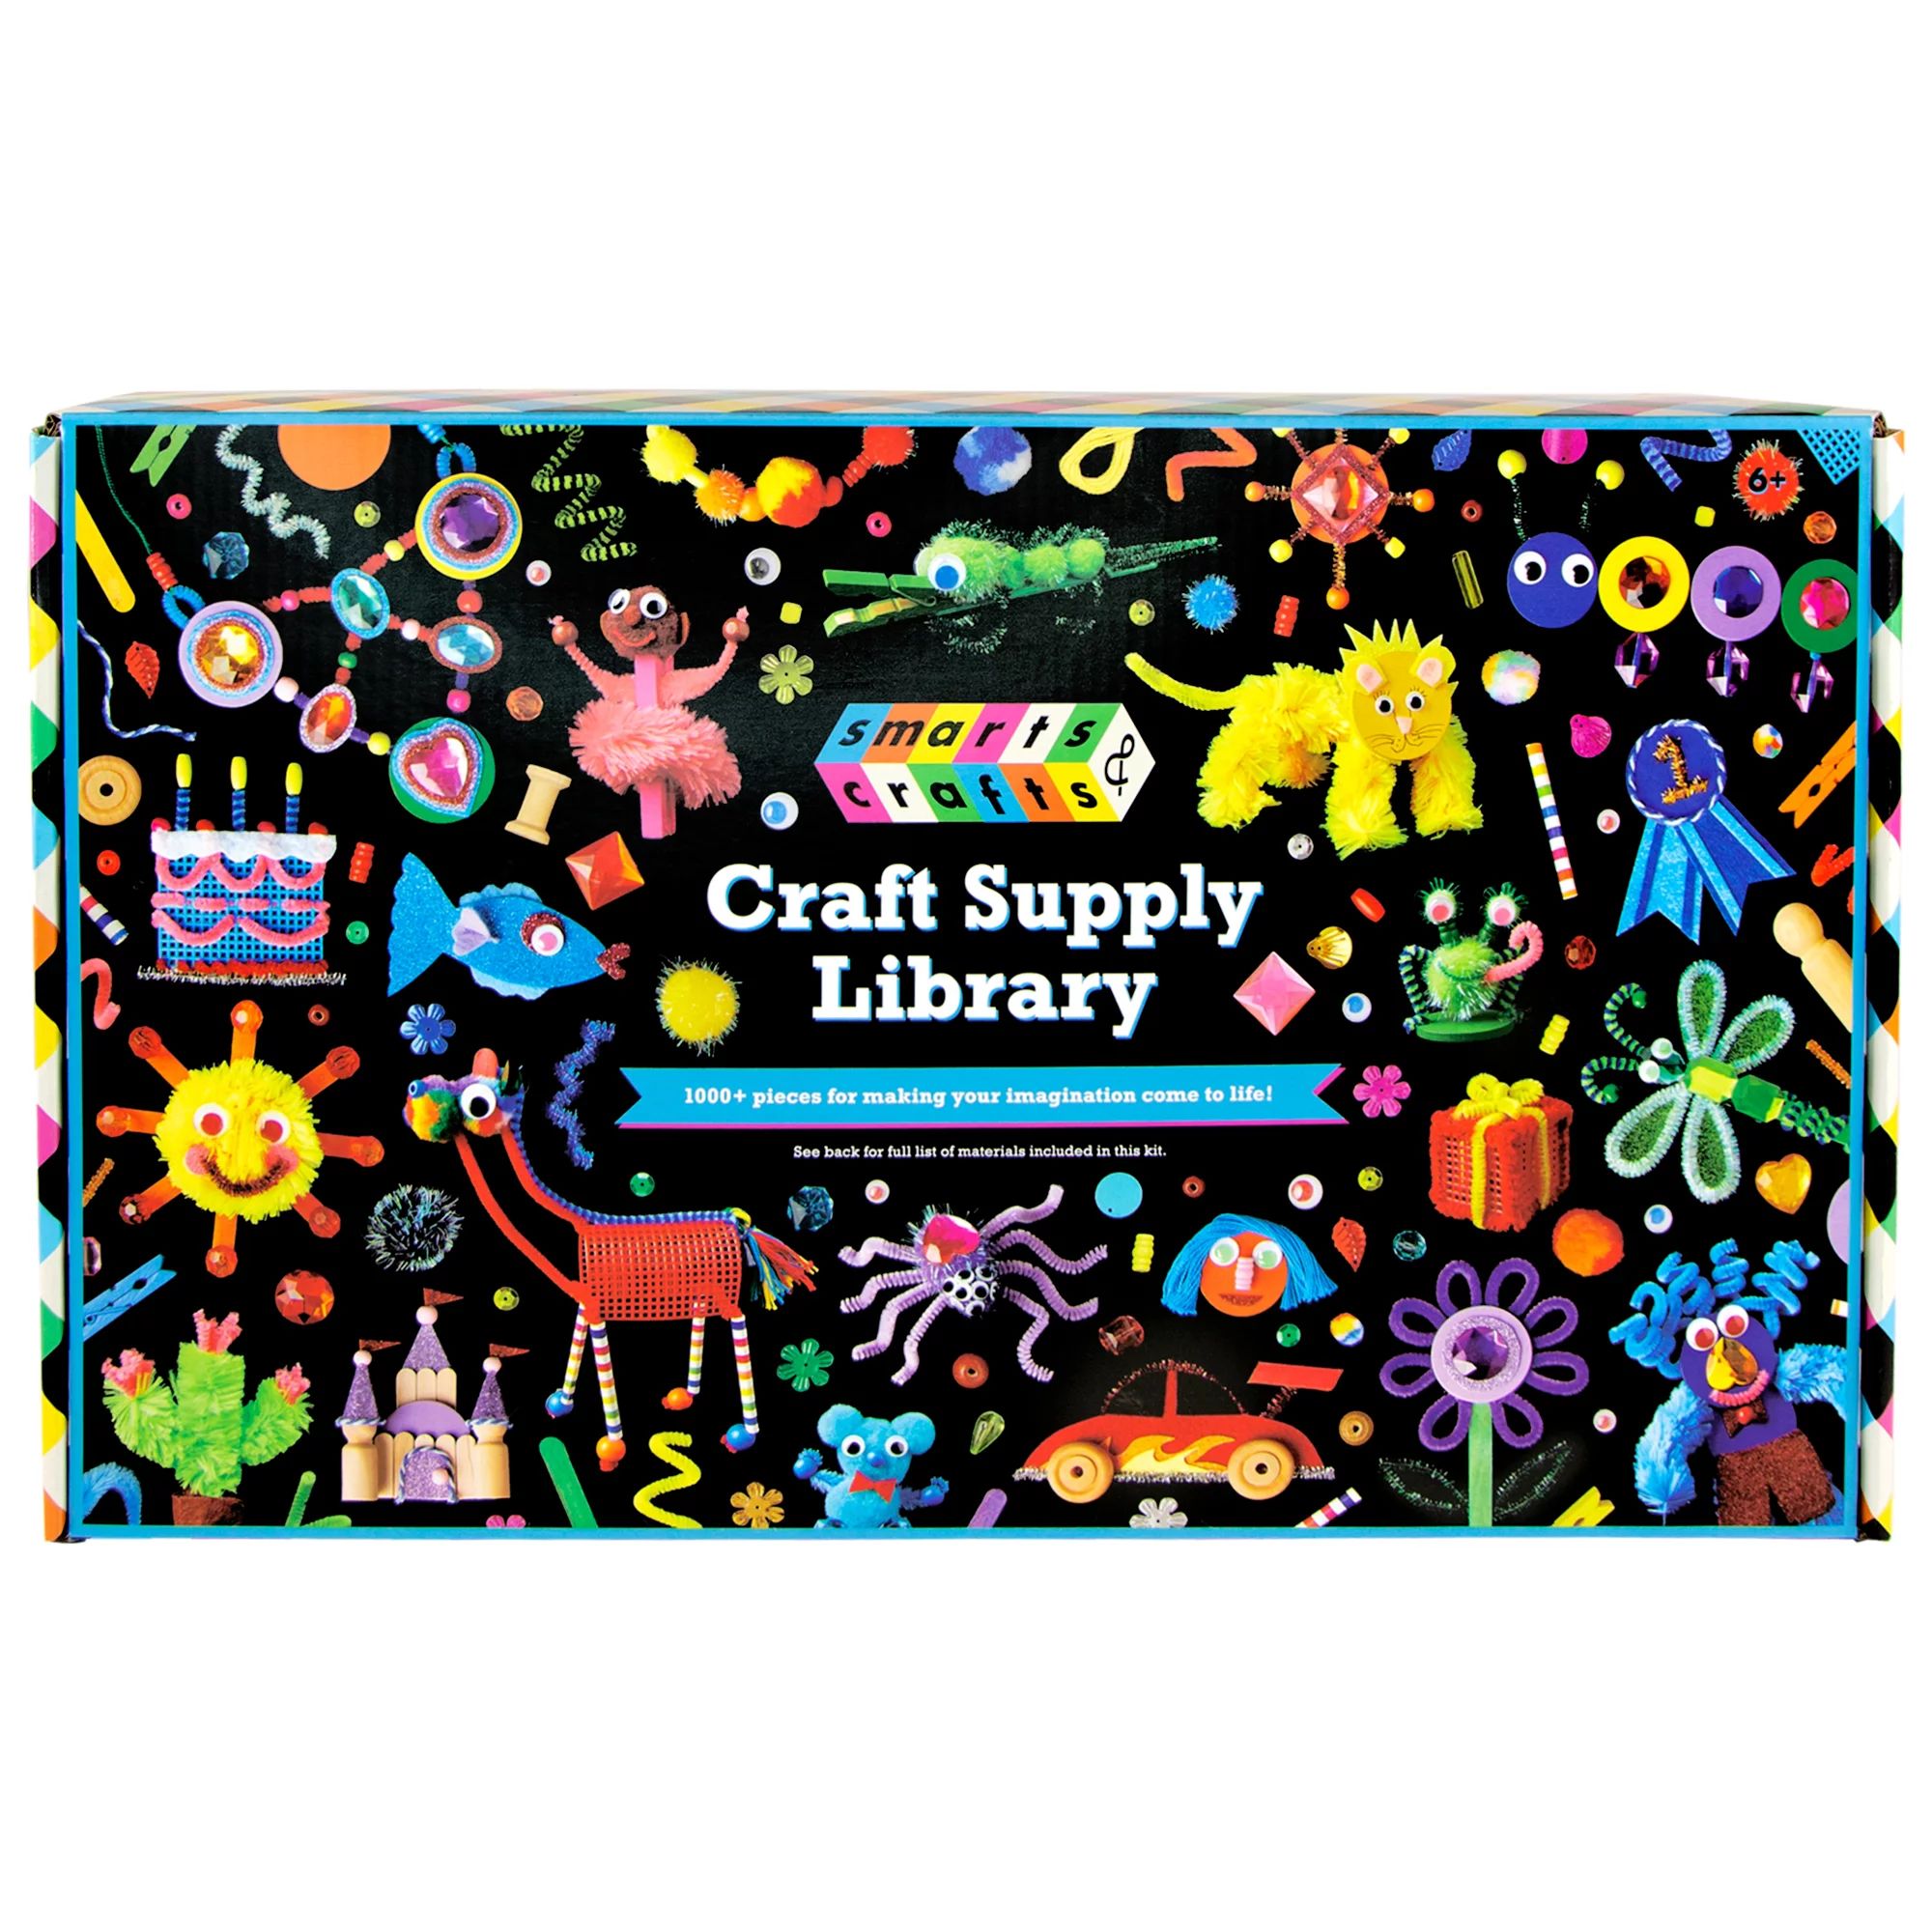 Smarts & Crafts Craft Supply Library Art & Craft Kit 1057 Pieces for Boys & Girls, Kids & Teens -... | Walmart (US)